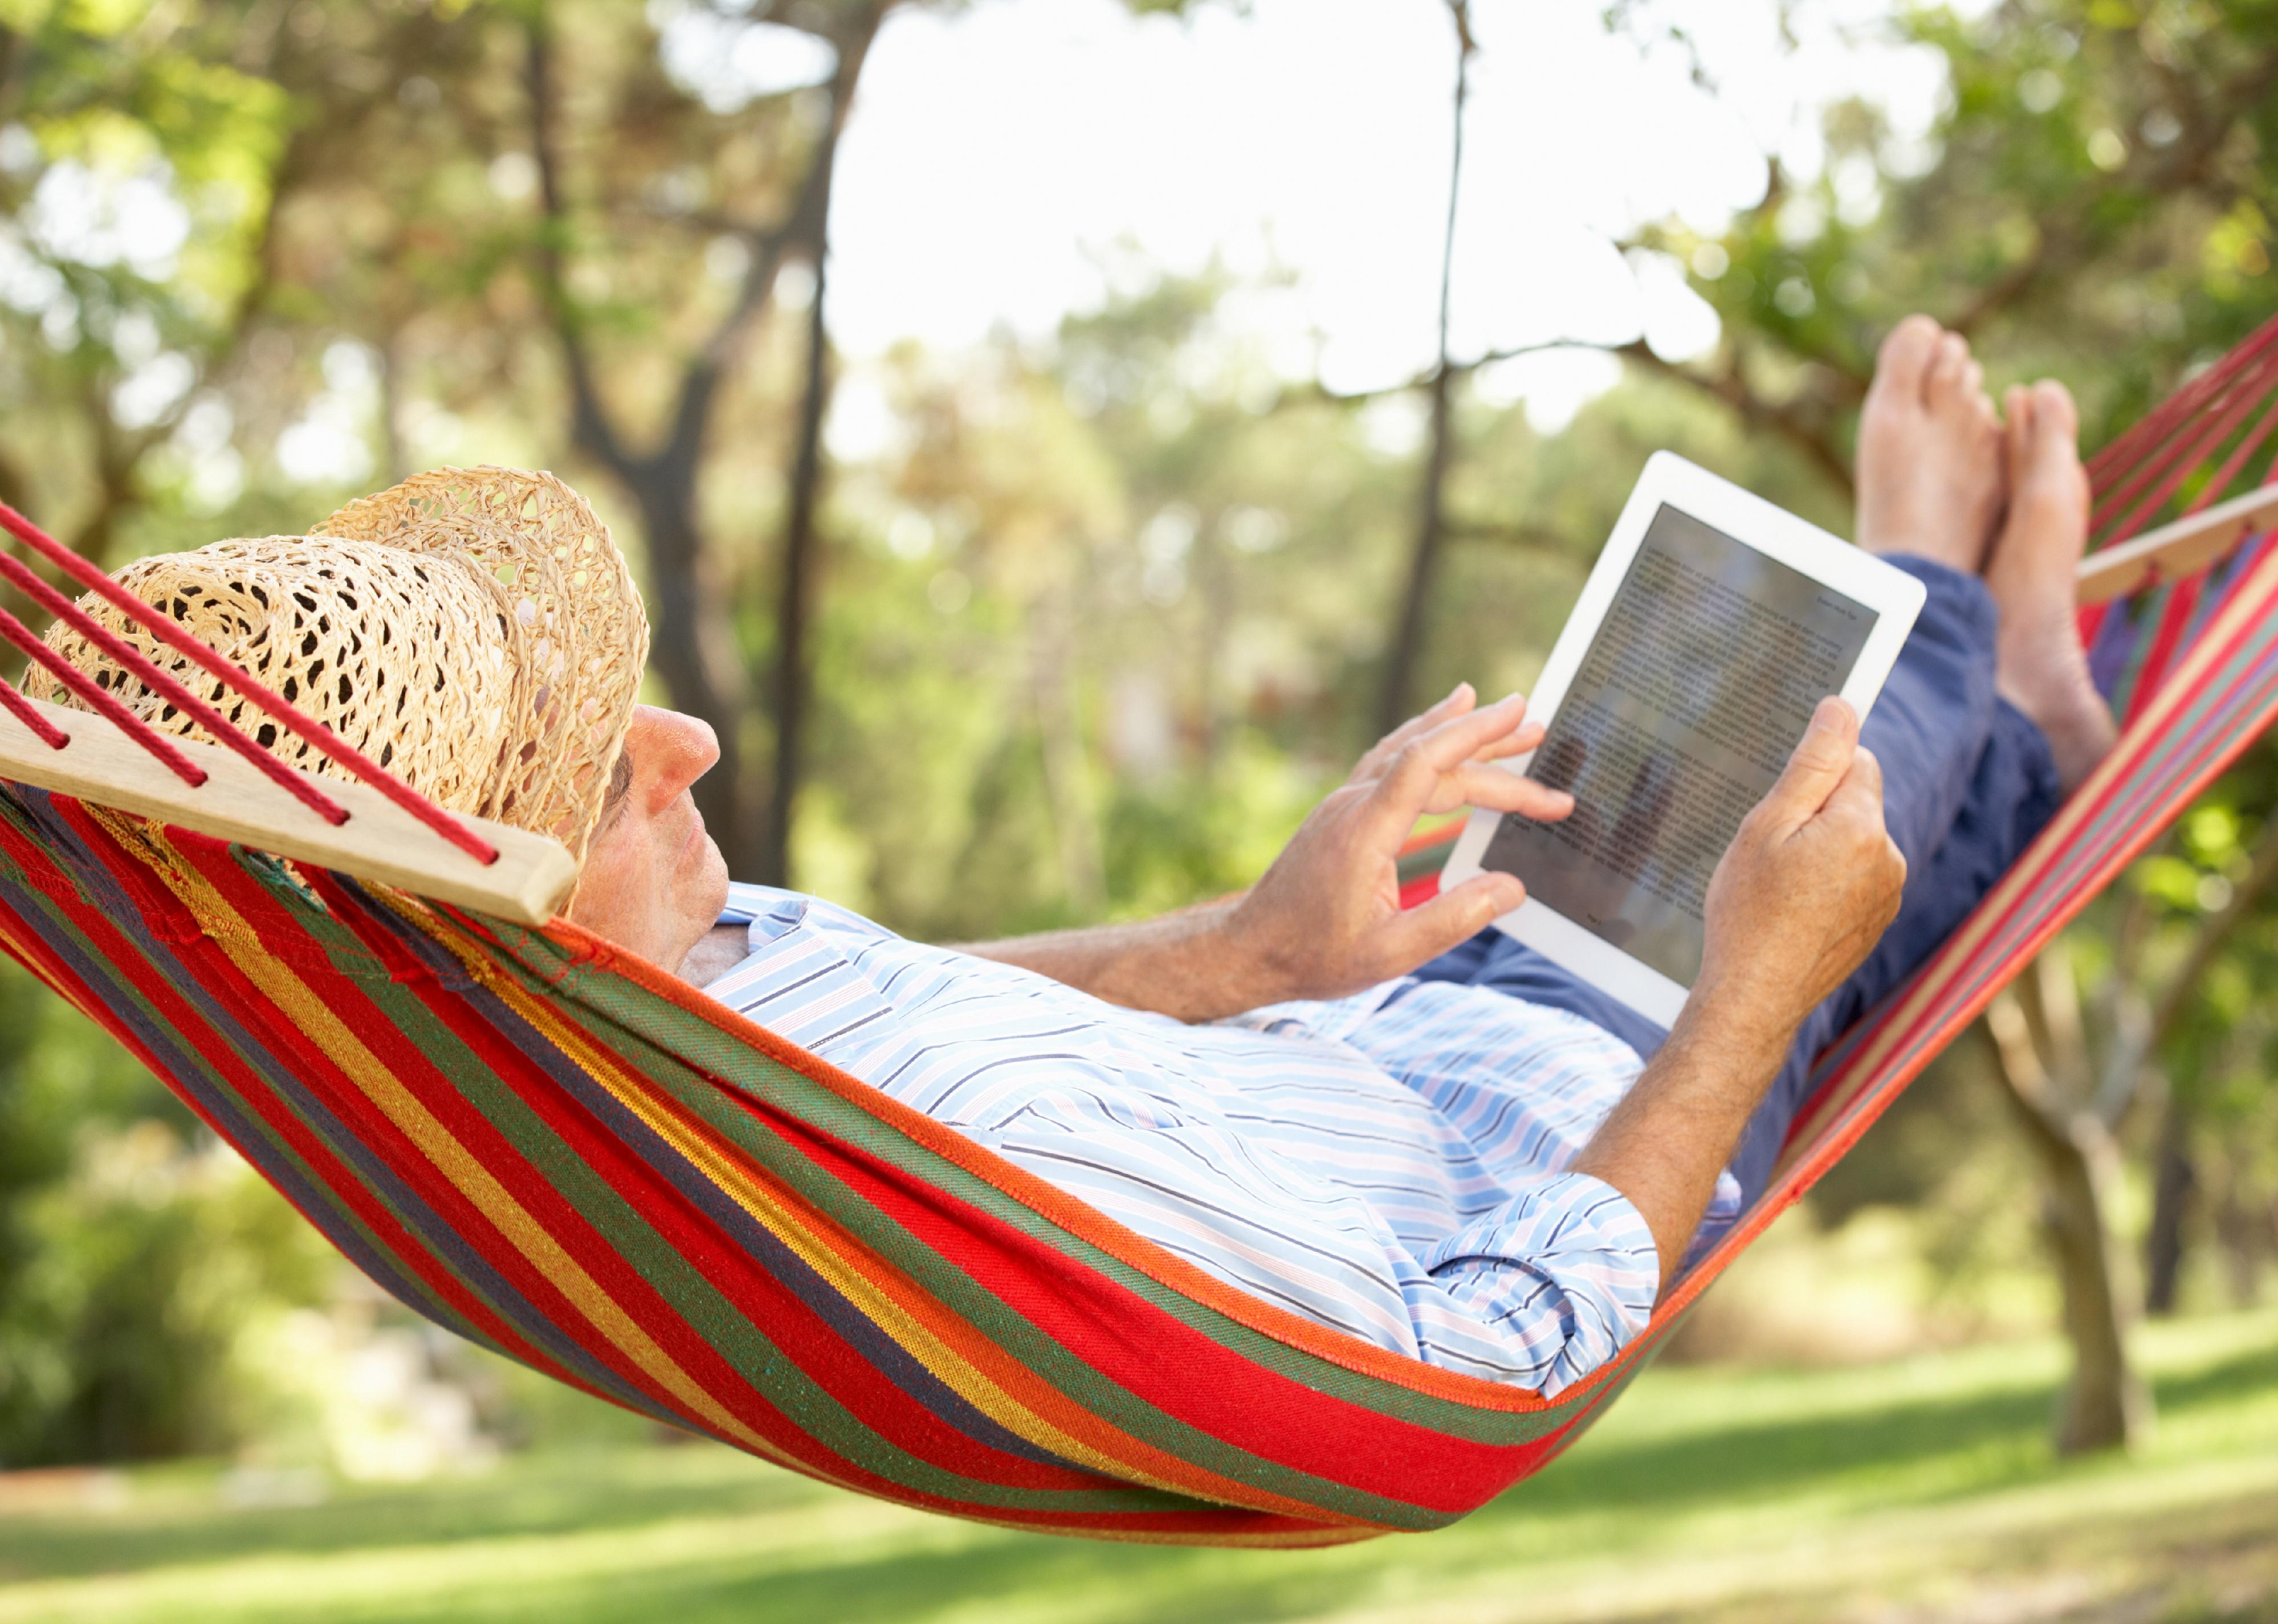 Senior relaxing in hammock with e-book.